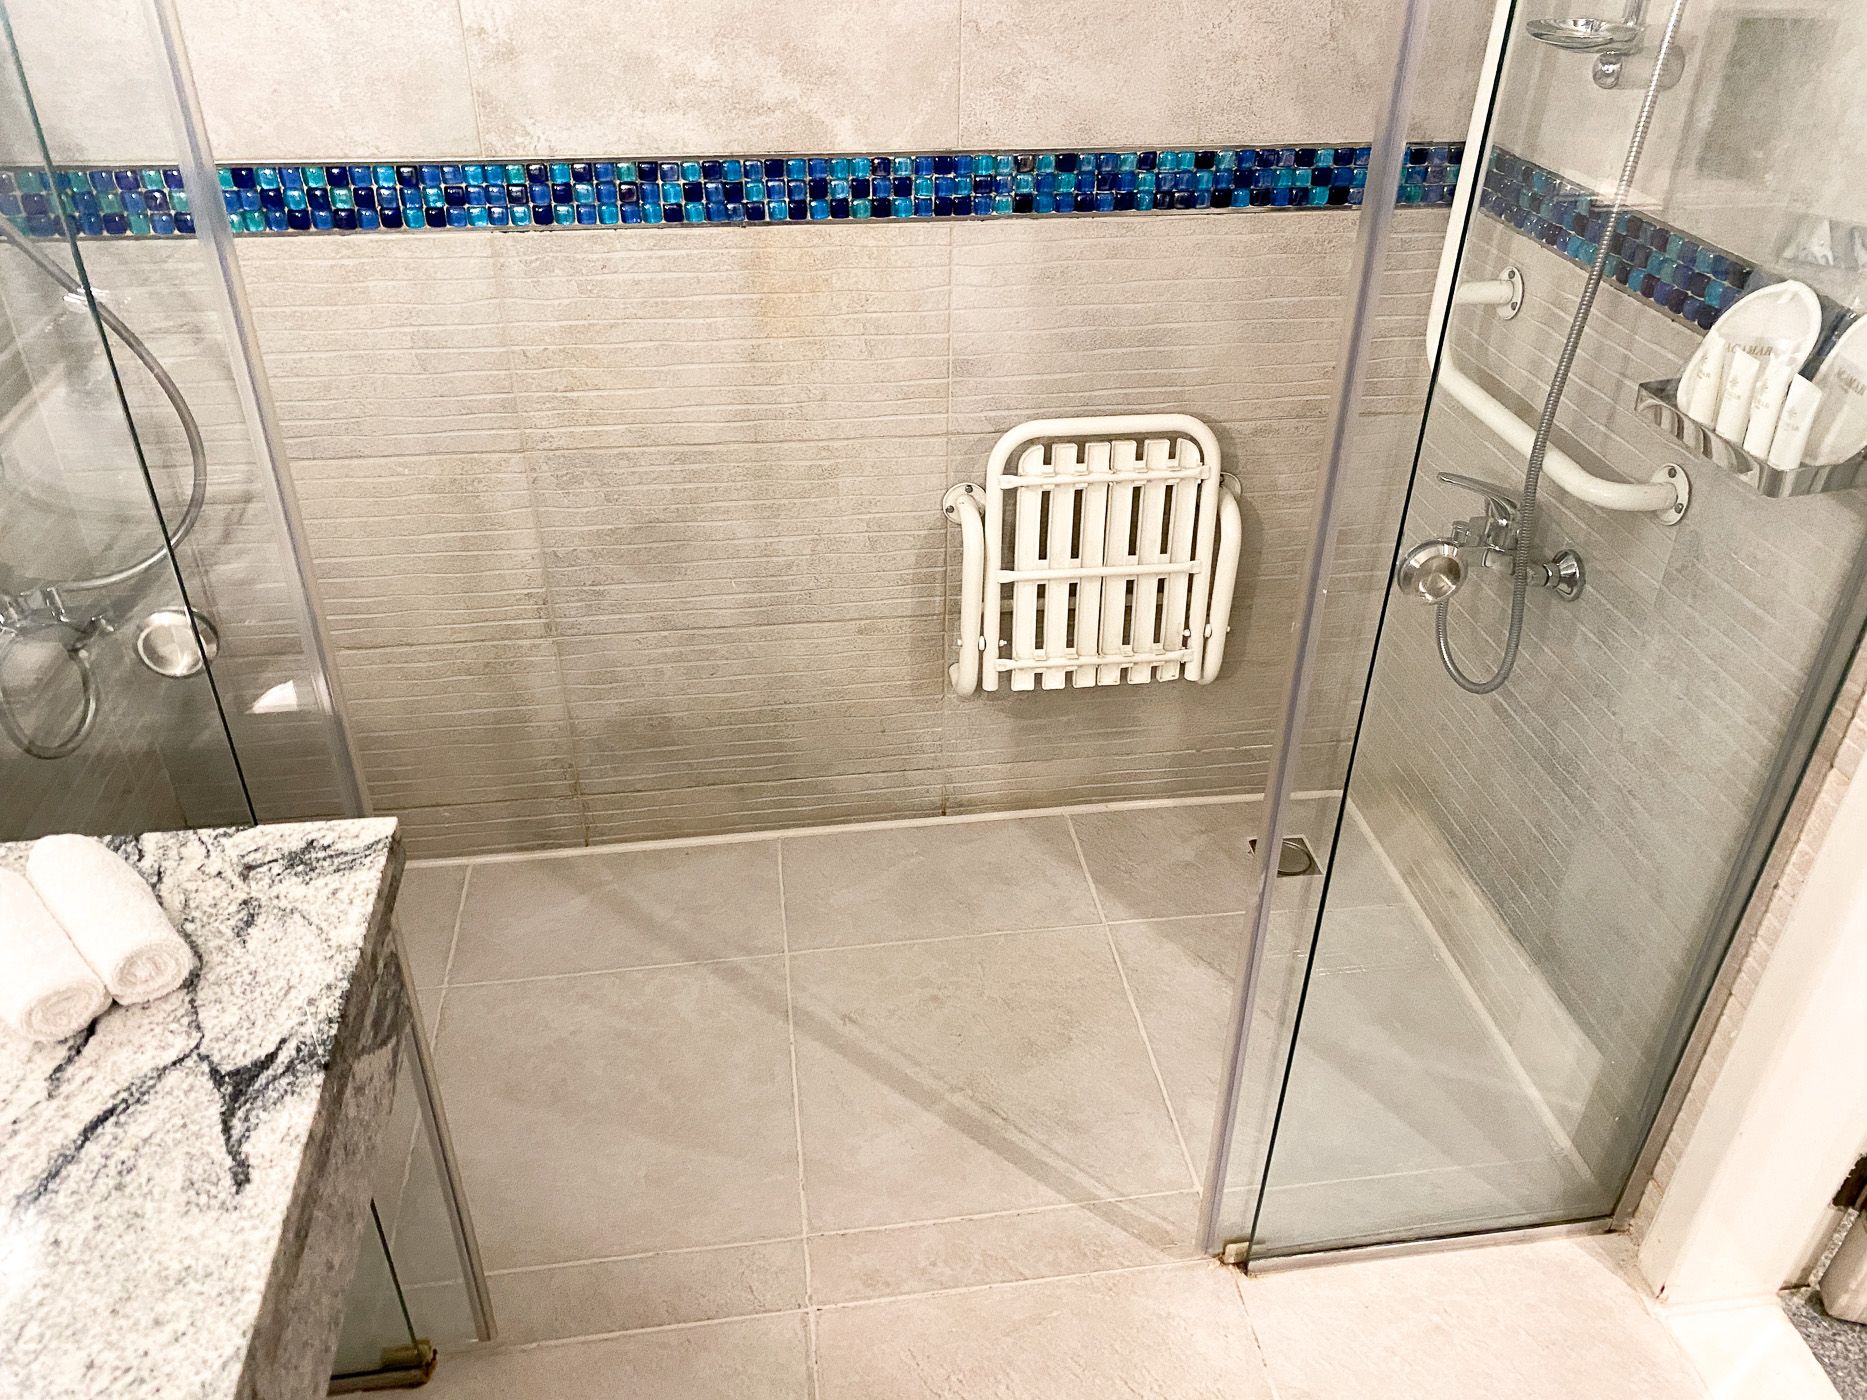 Accessible hotel with a roll-in shower. Equipped with features such as grab bars, smooth flooring, and handheld shower head.